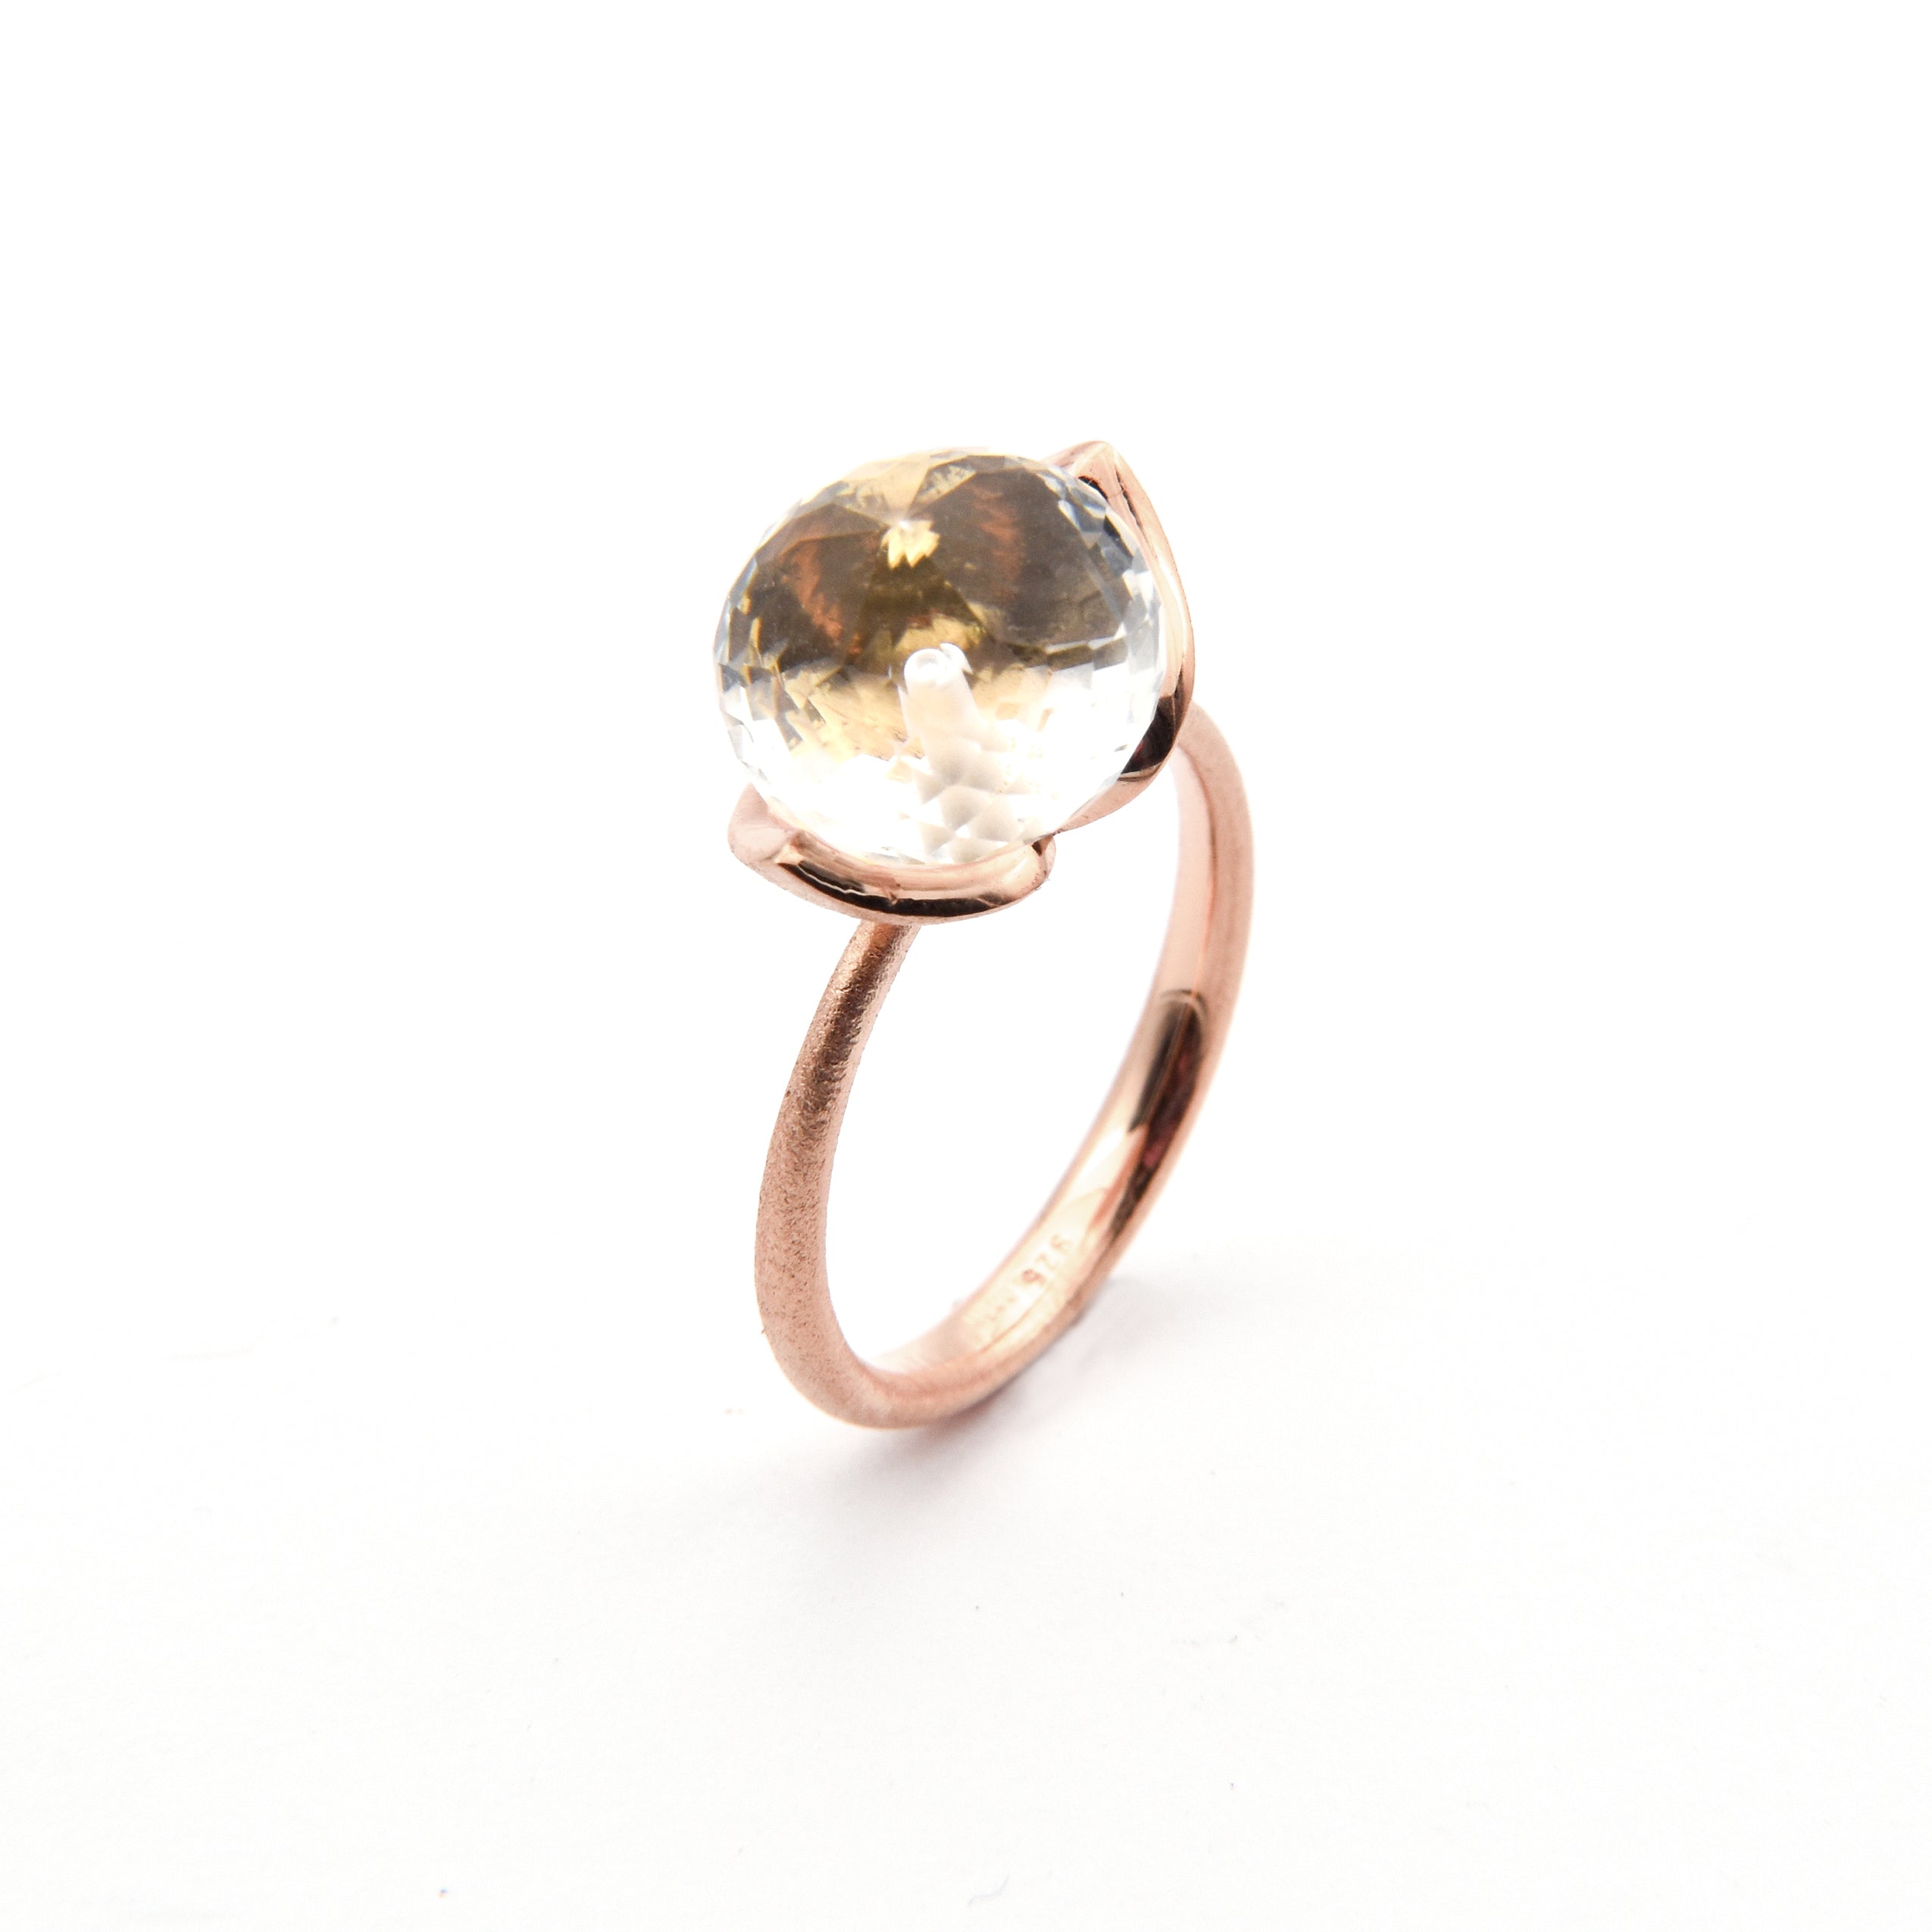 Dolce ring "medium" with rock crystal 925/-